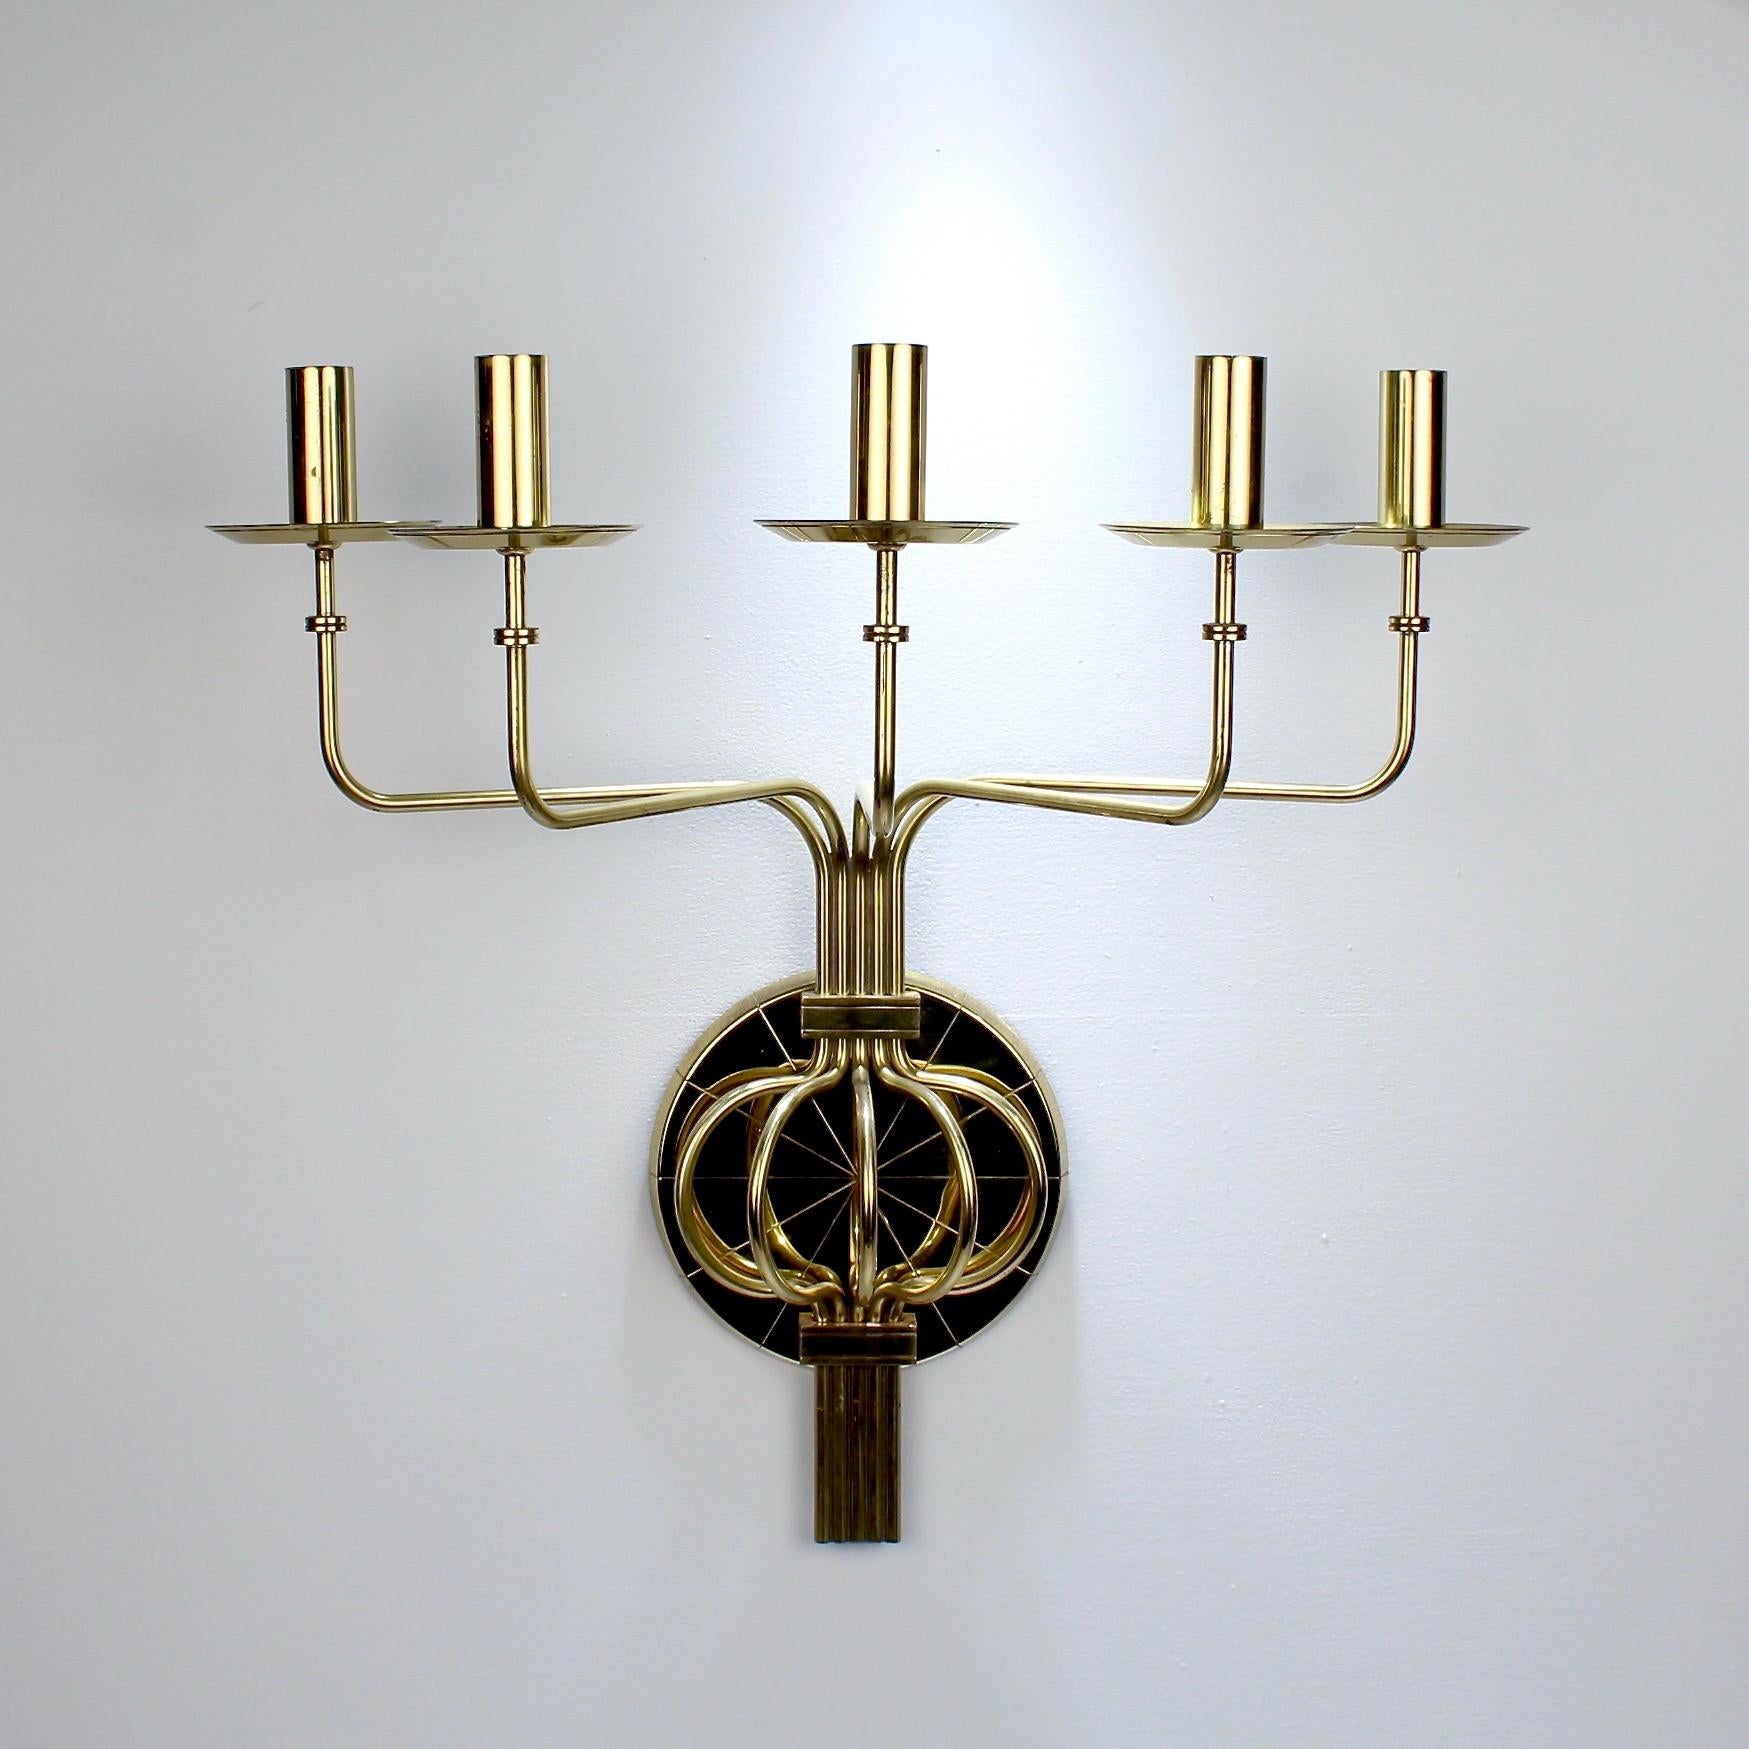 An original pair of iconic Tommi Parzinger Mid-Century Modern brass wall sconces.

Each with 5 lights (or candleholders) on individual arms that are centered on a round disk. 

One of the largest models designed by Parzinger.

Marked for